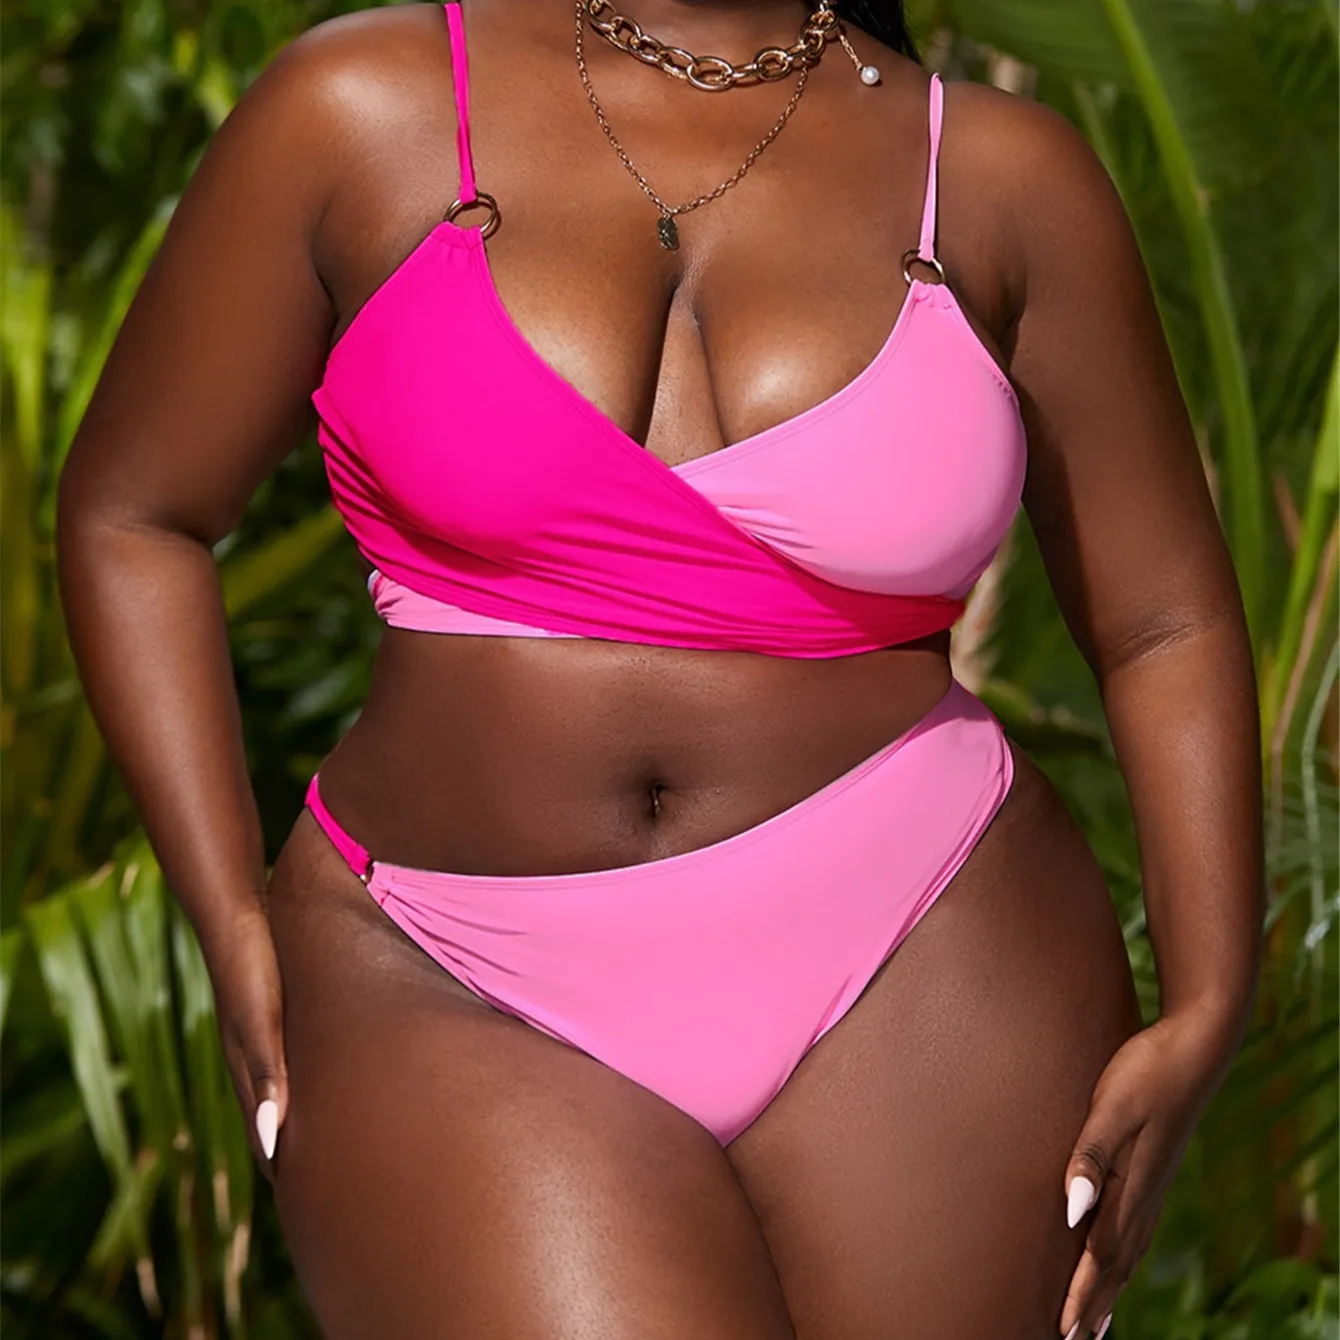 New Summer Plus Size Sexy Girl Pink Two Pieces High Cut Padded Push Up Swimwear Swimsuits Bathing Suits Bikini Set For Fat Women